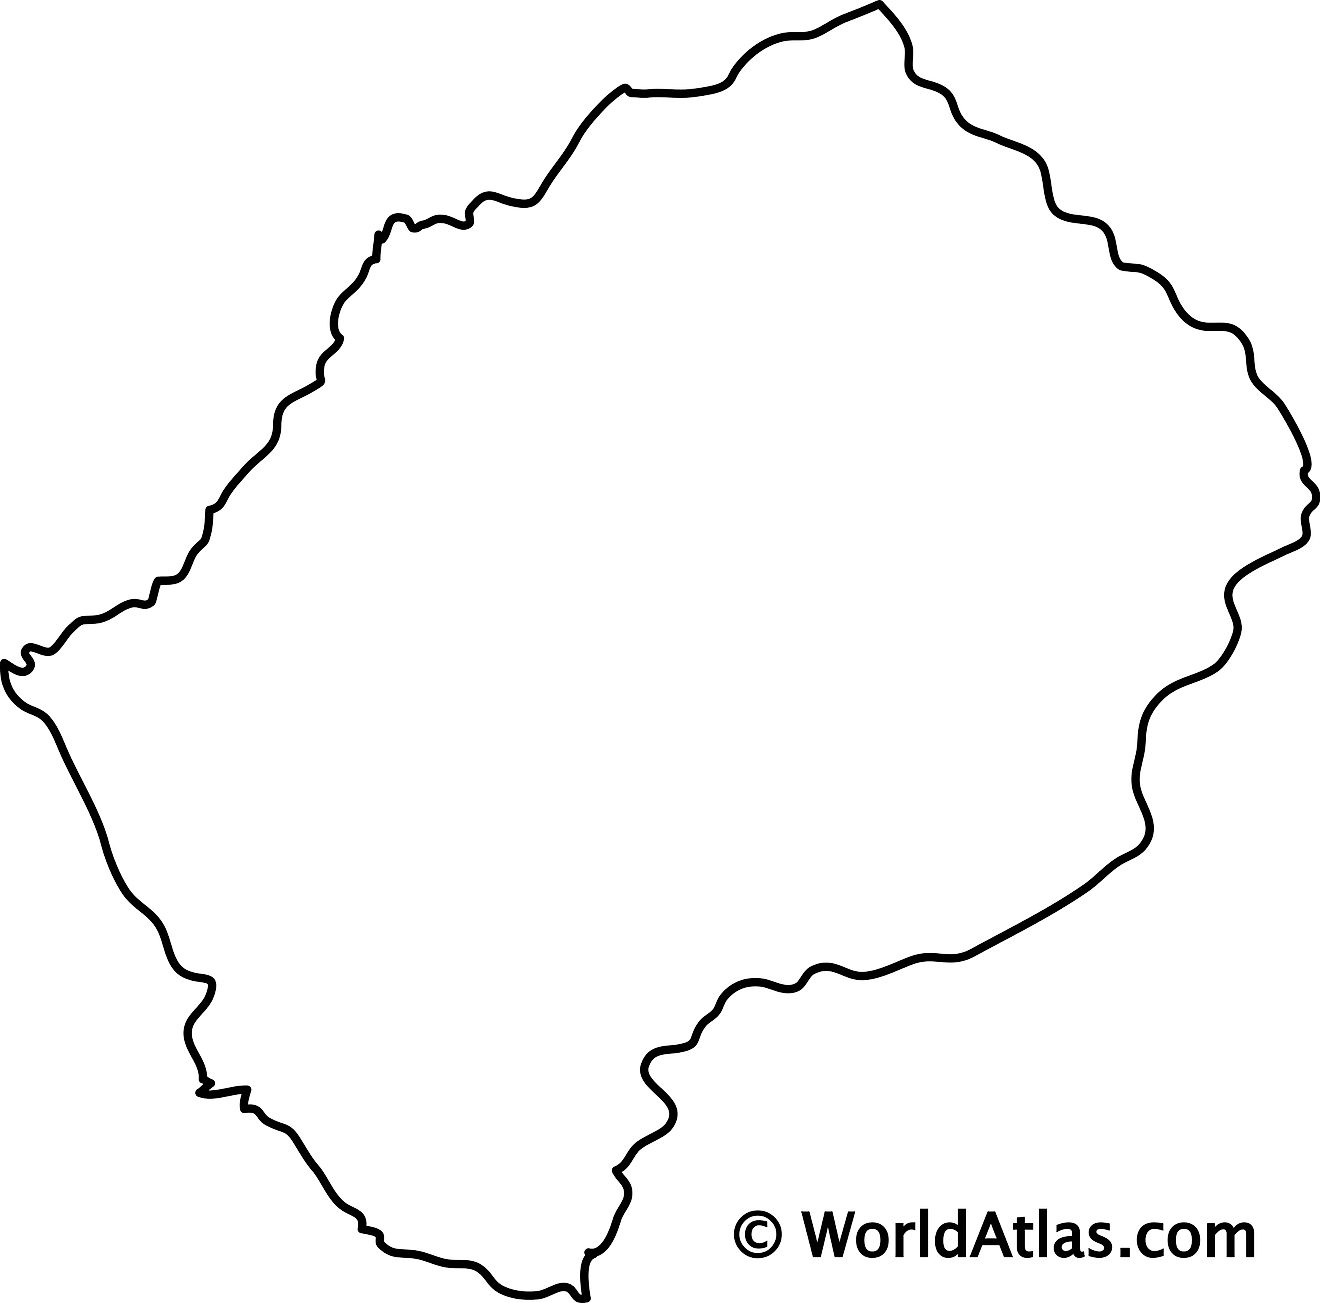 Blank Outline Map of Lesotho